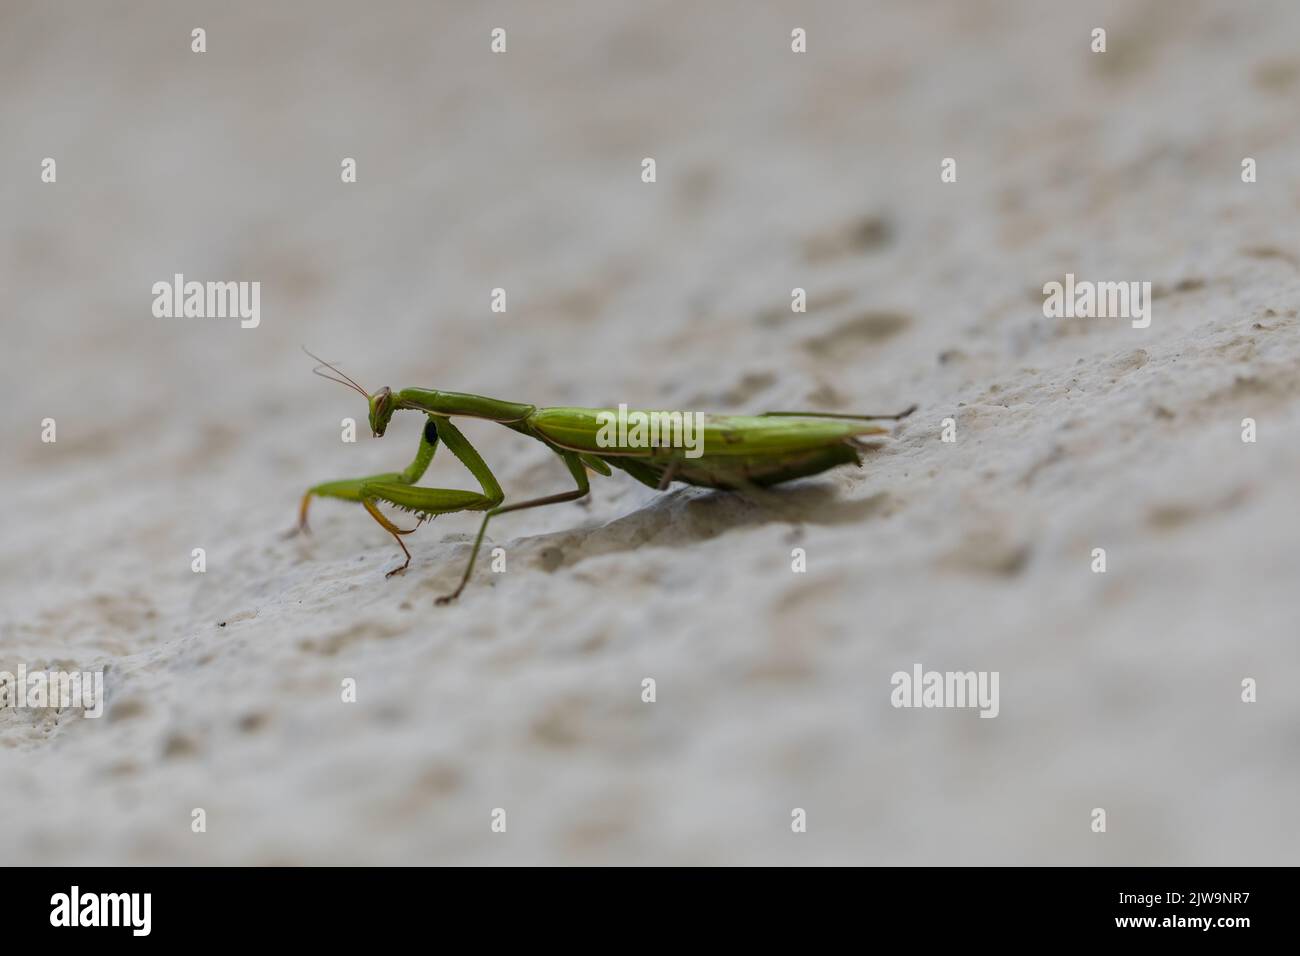 Mantis, a predator insect, close-up on a light background Stock Photo